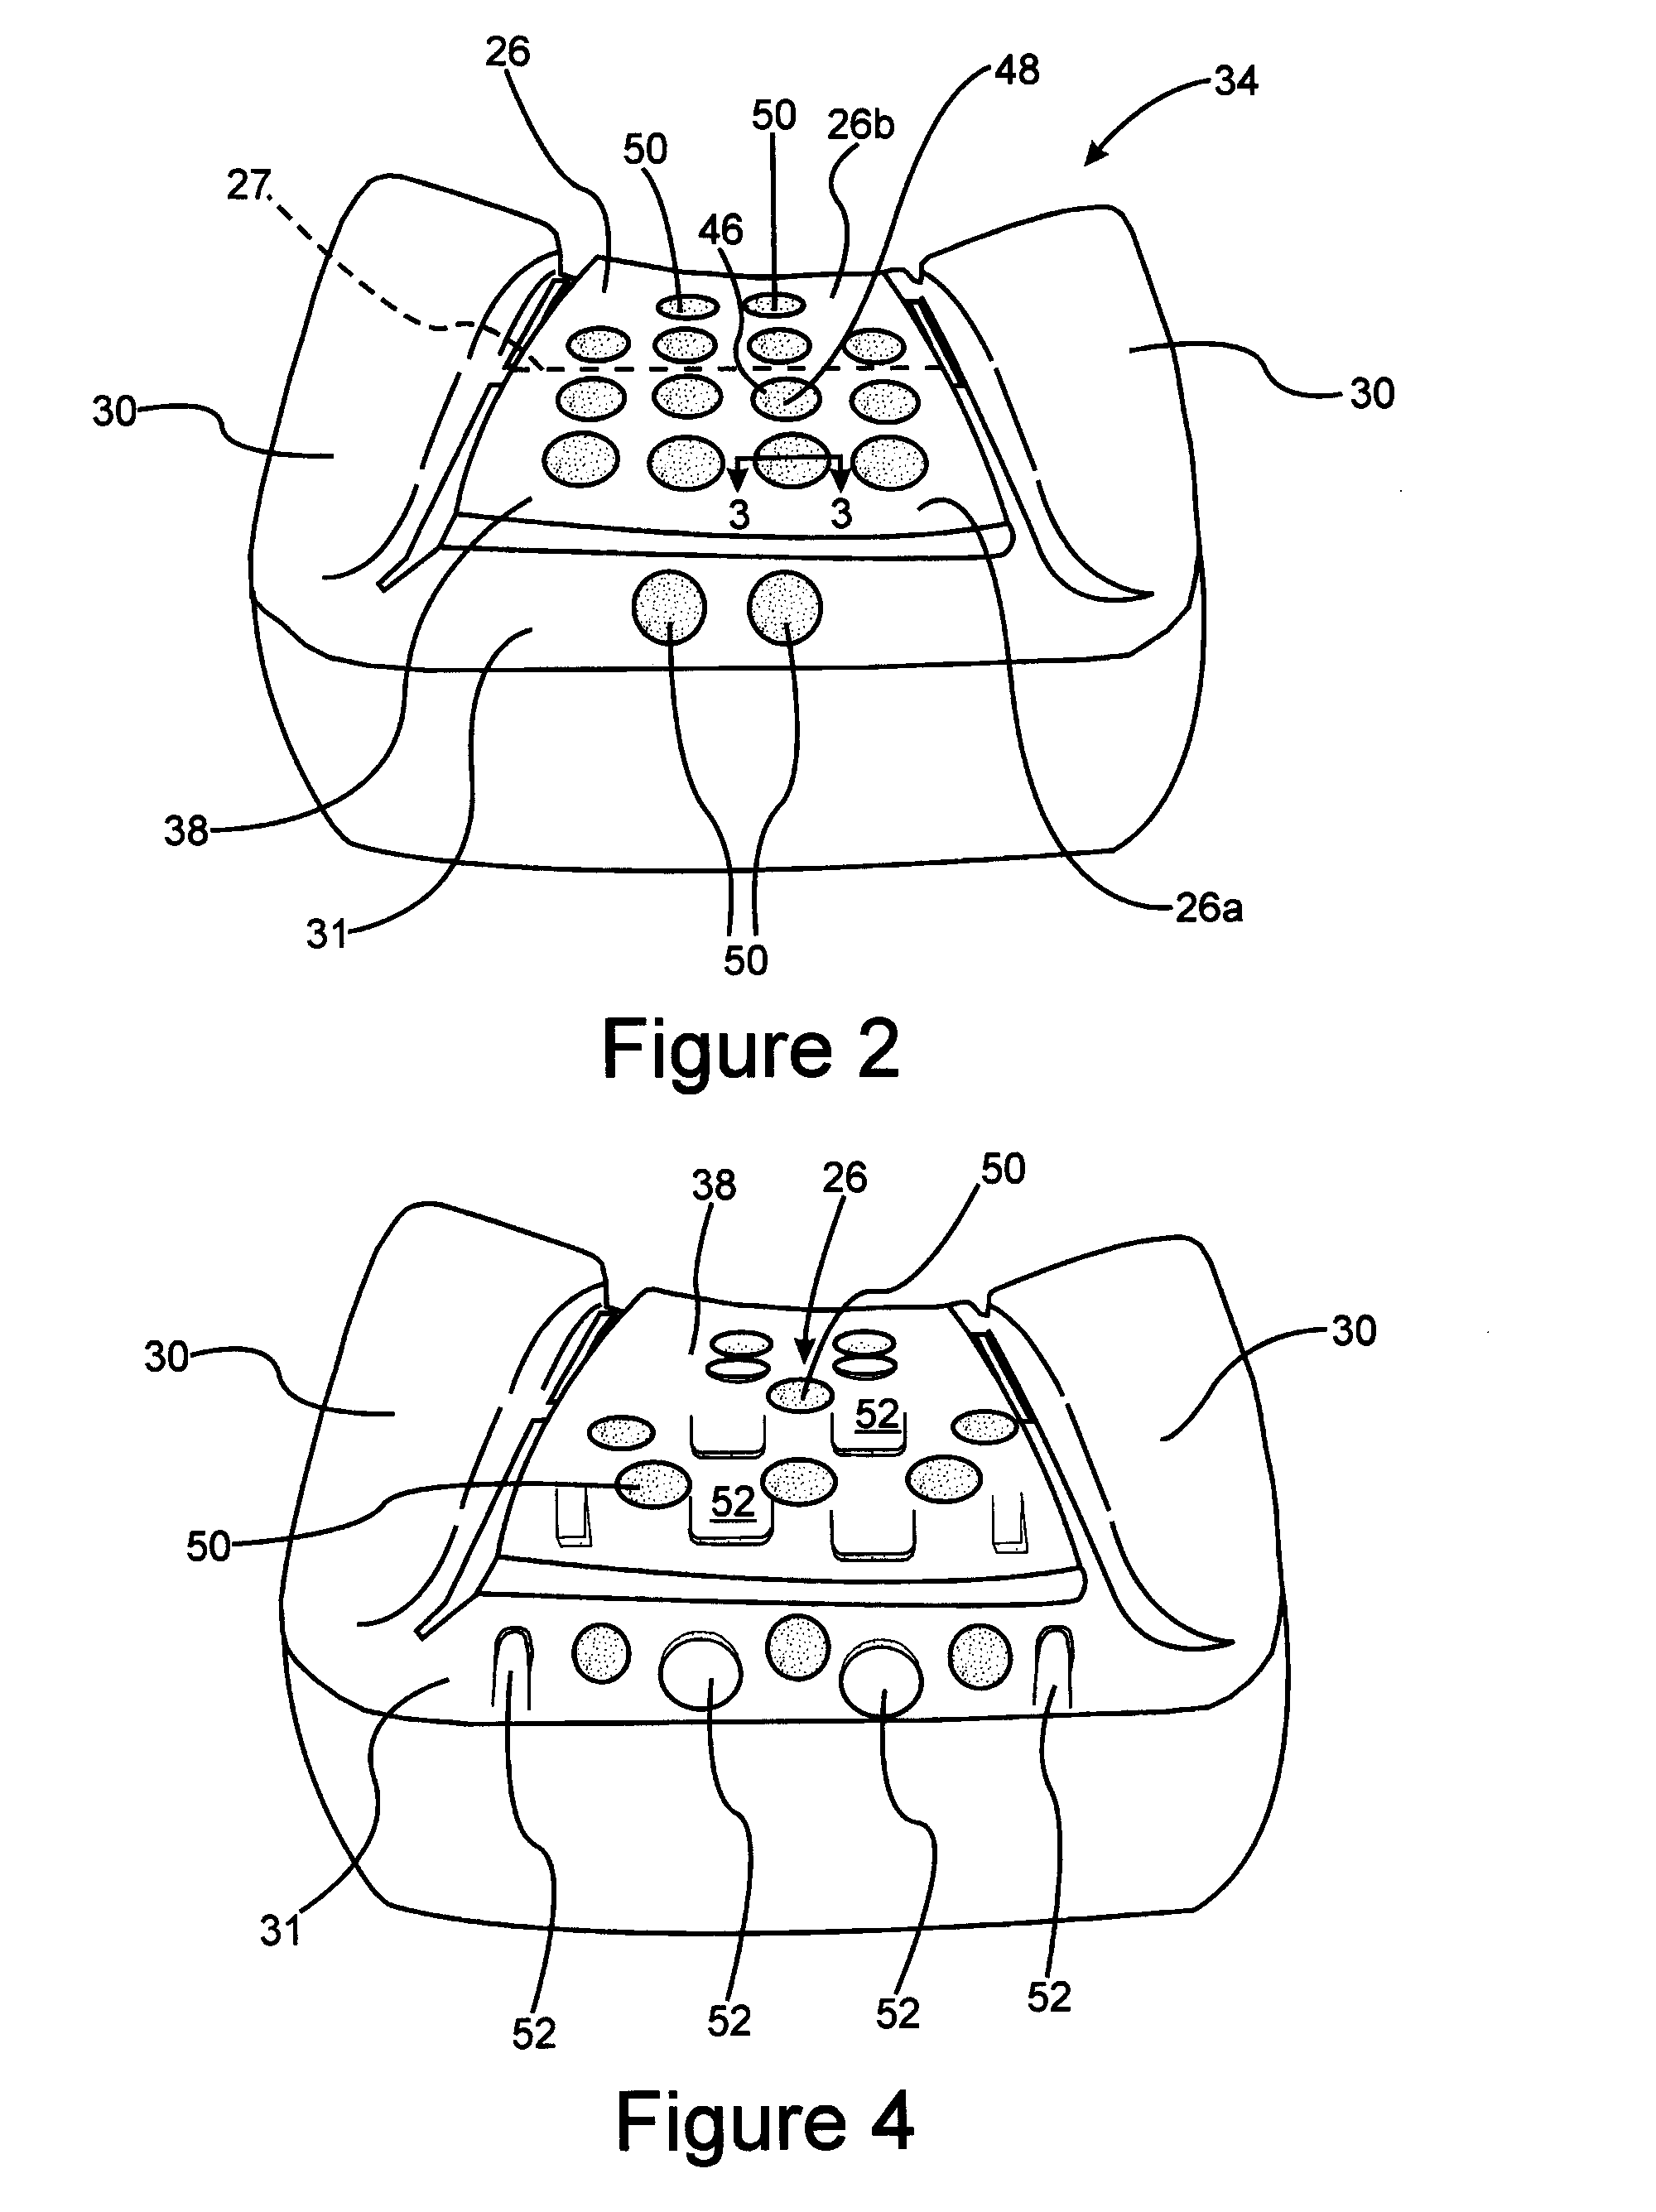 Vehicle seat assembly having a hardness gradient via "a" surface intrusions and/or protrusions